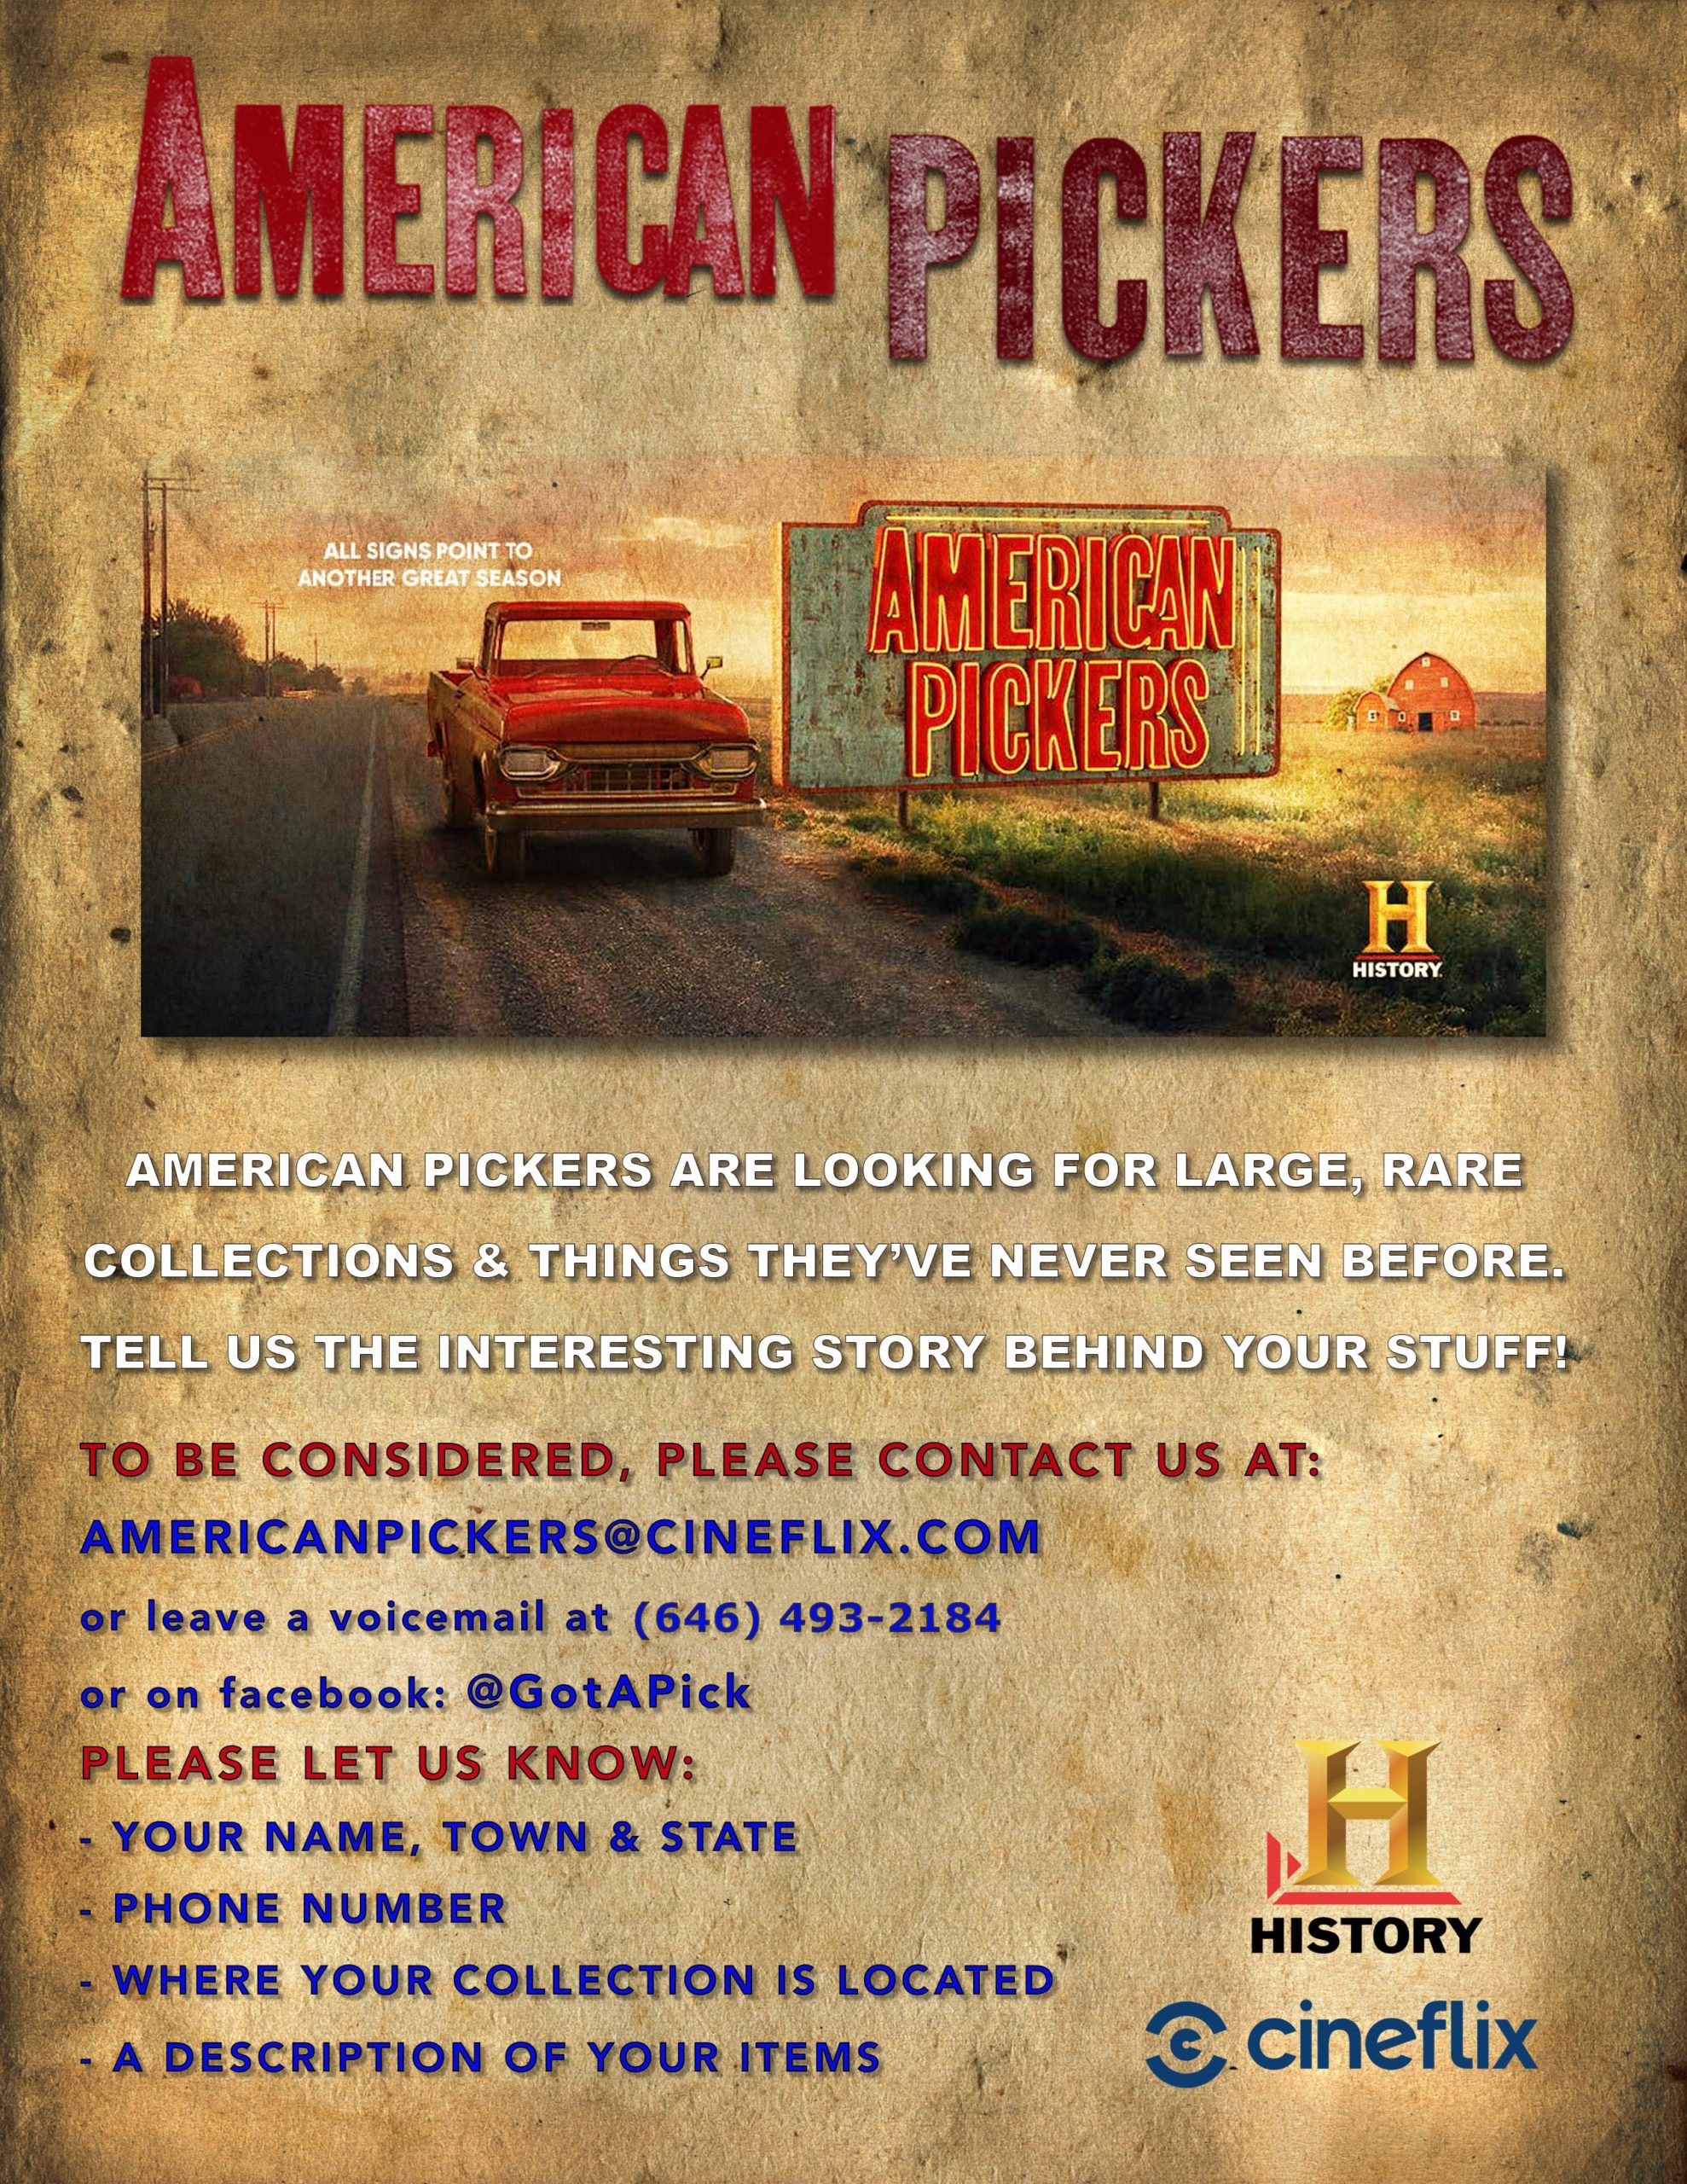 ‘American Pickers’ is coming back to Florida, and they need your help